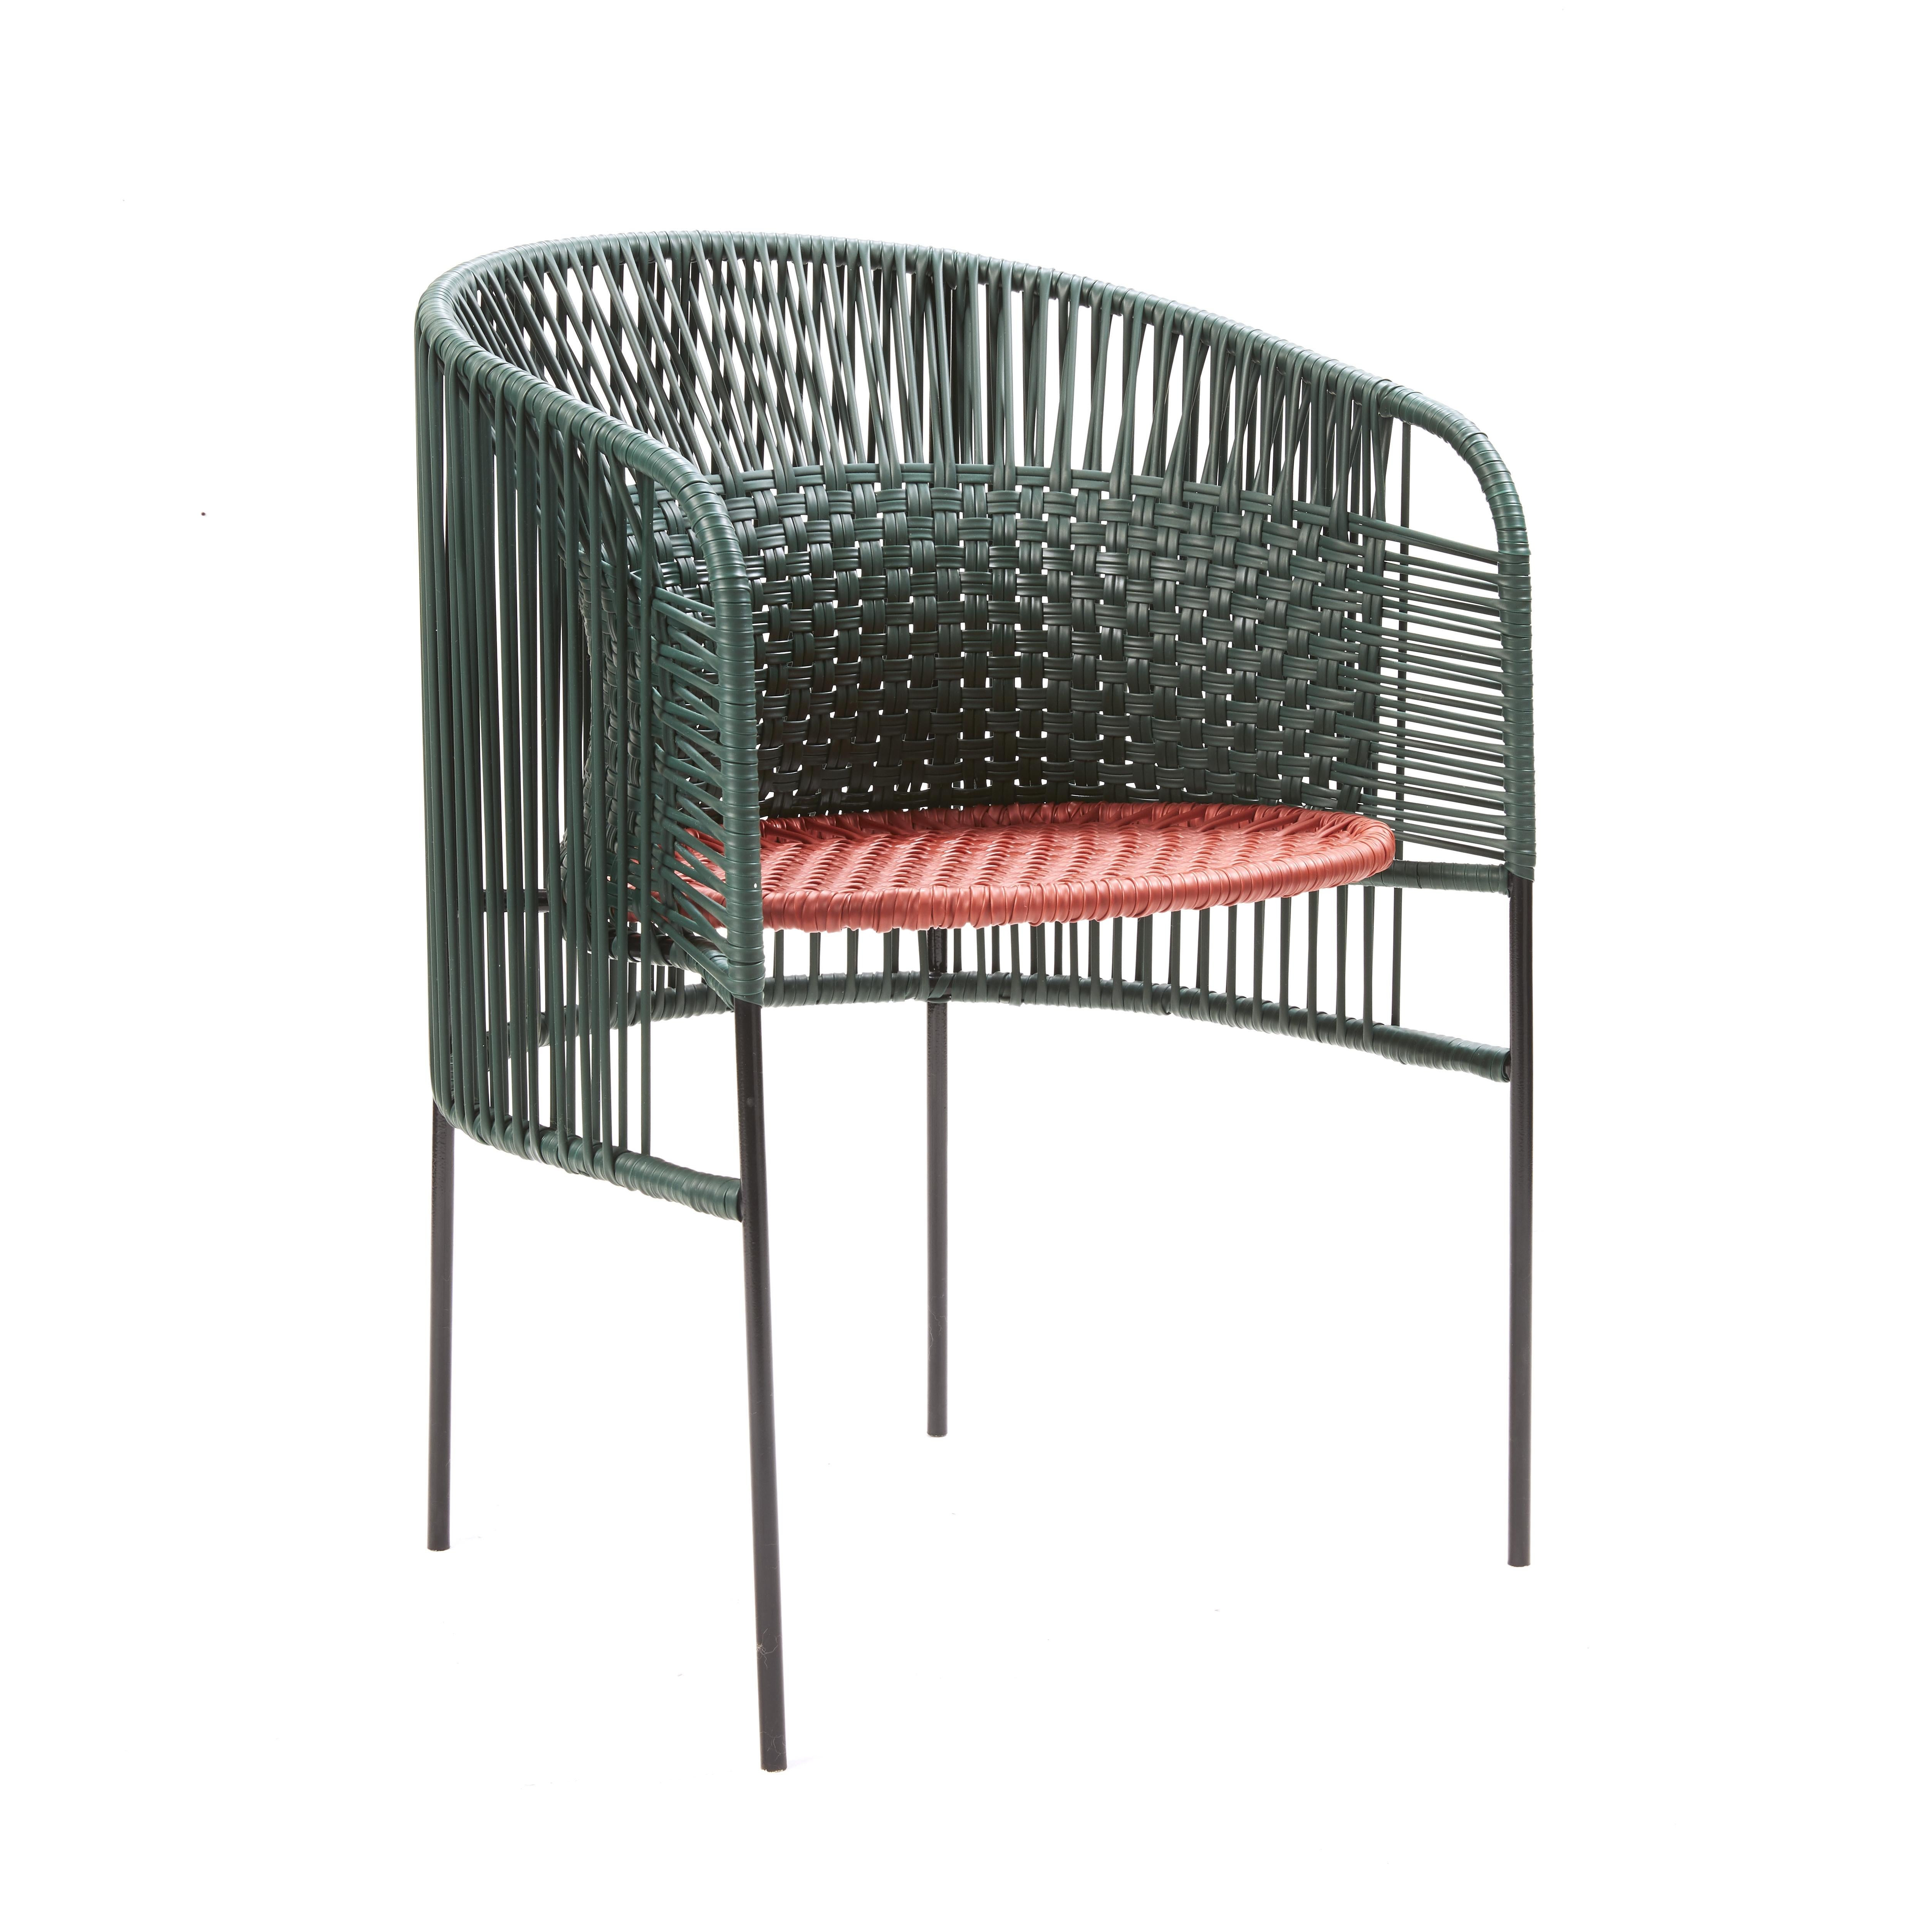 Powder-Coated Green Caribe Chic Dining Chair by Sebastian Herkner For Sale